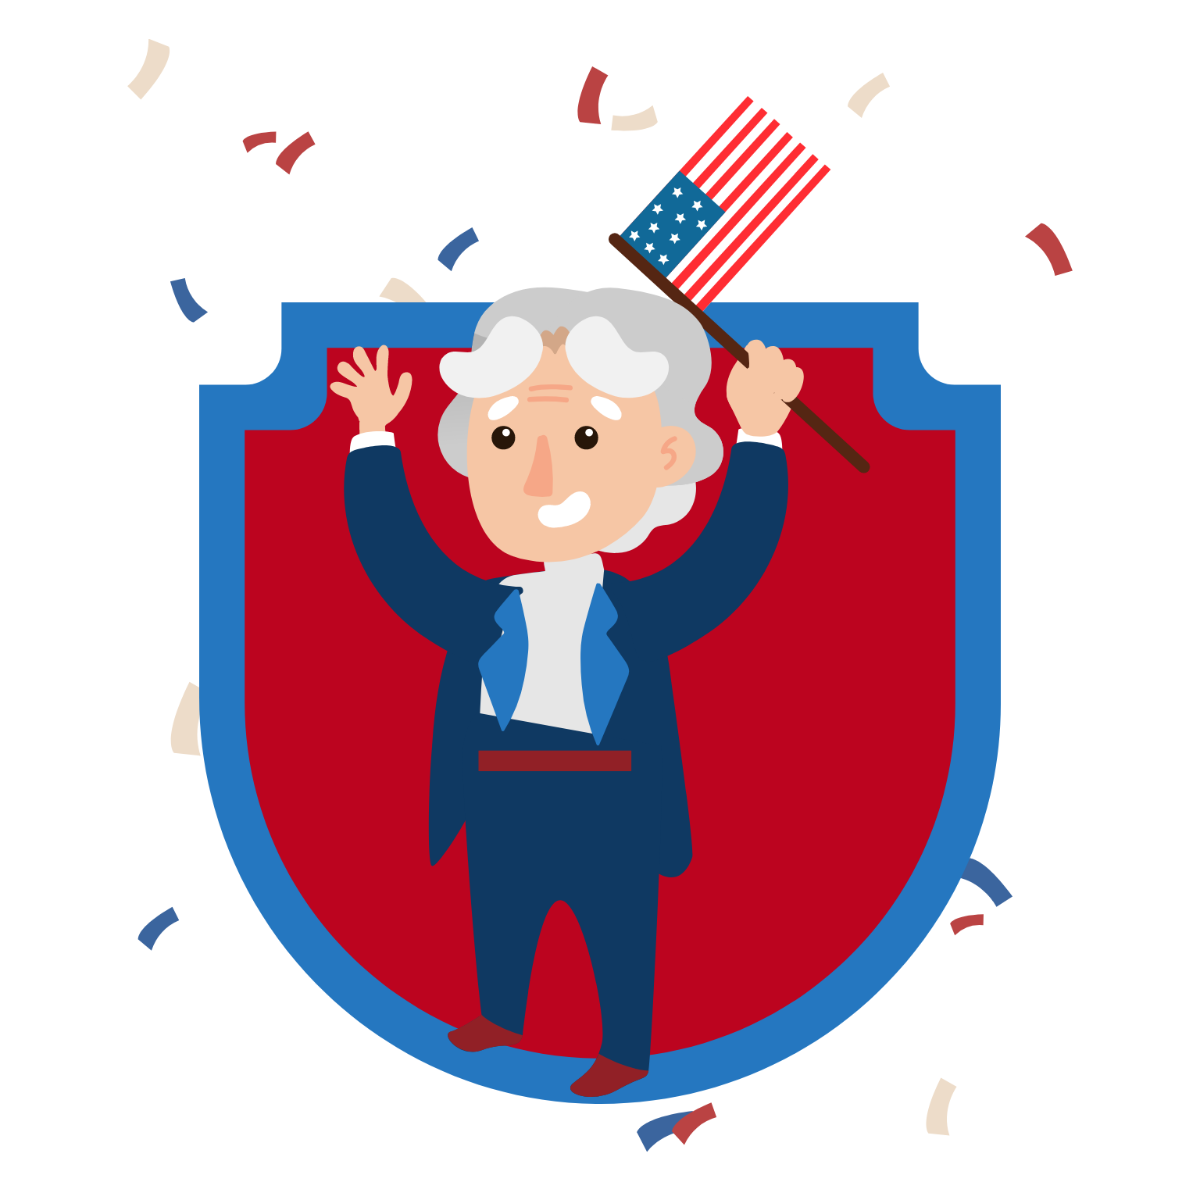 President's Day Holiday Clip Art Template